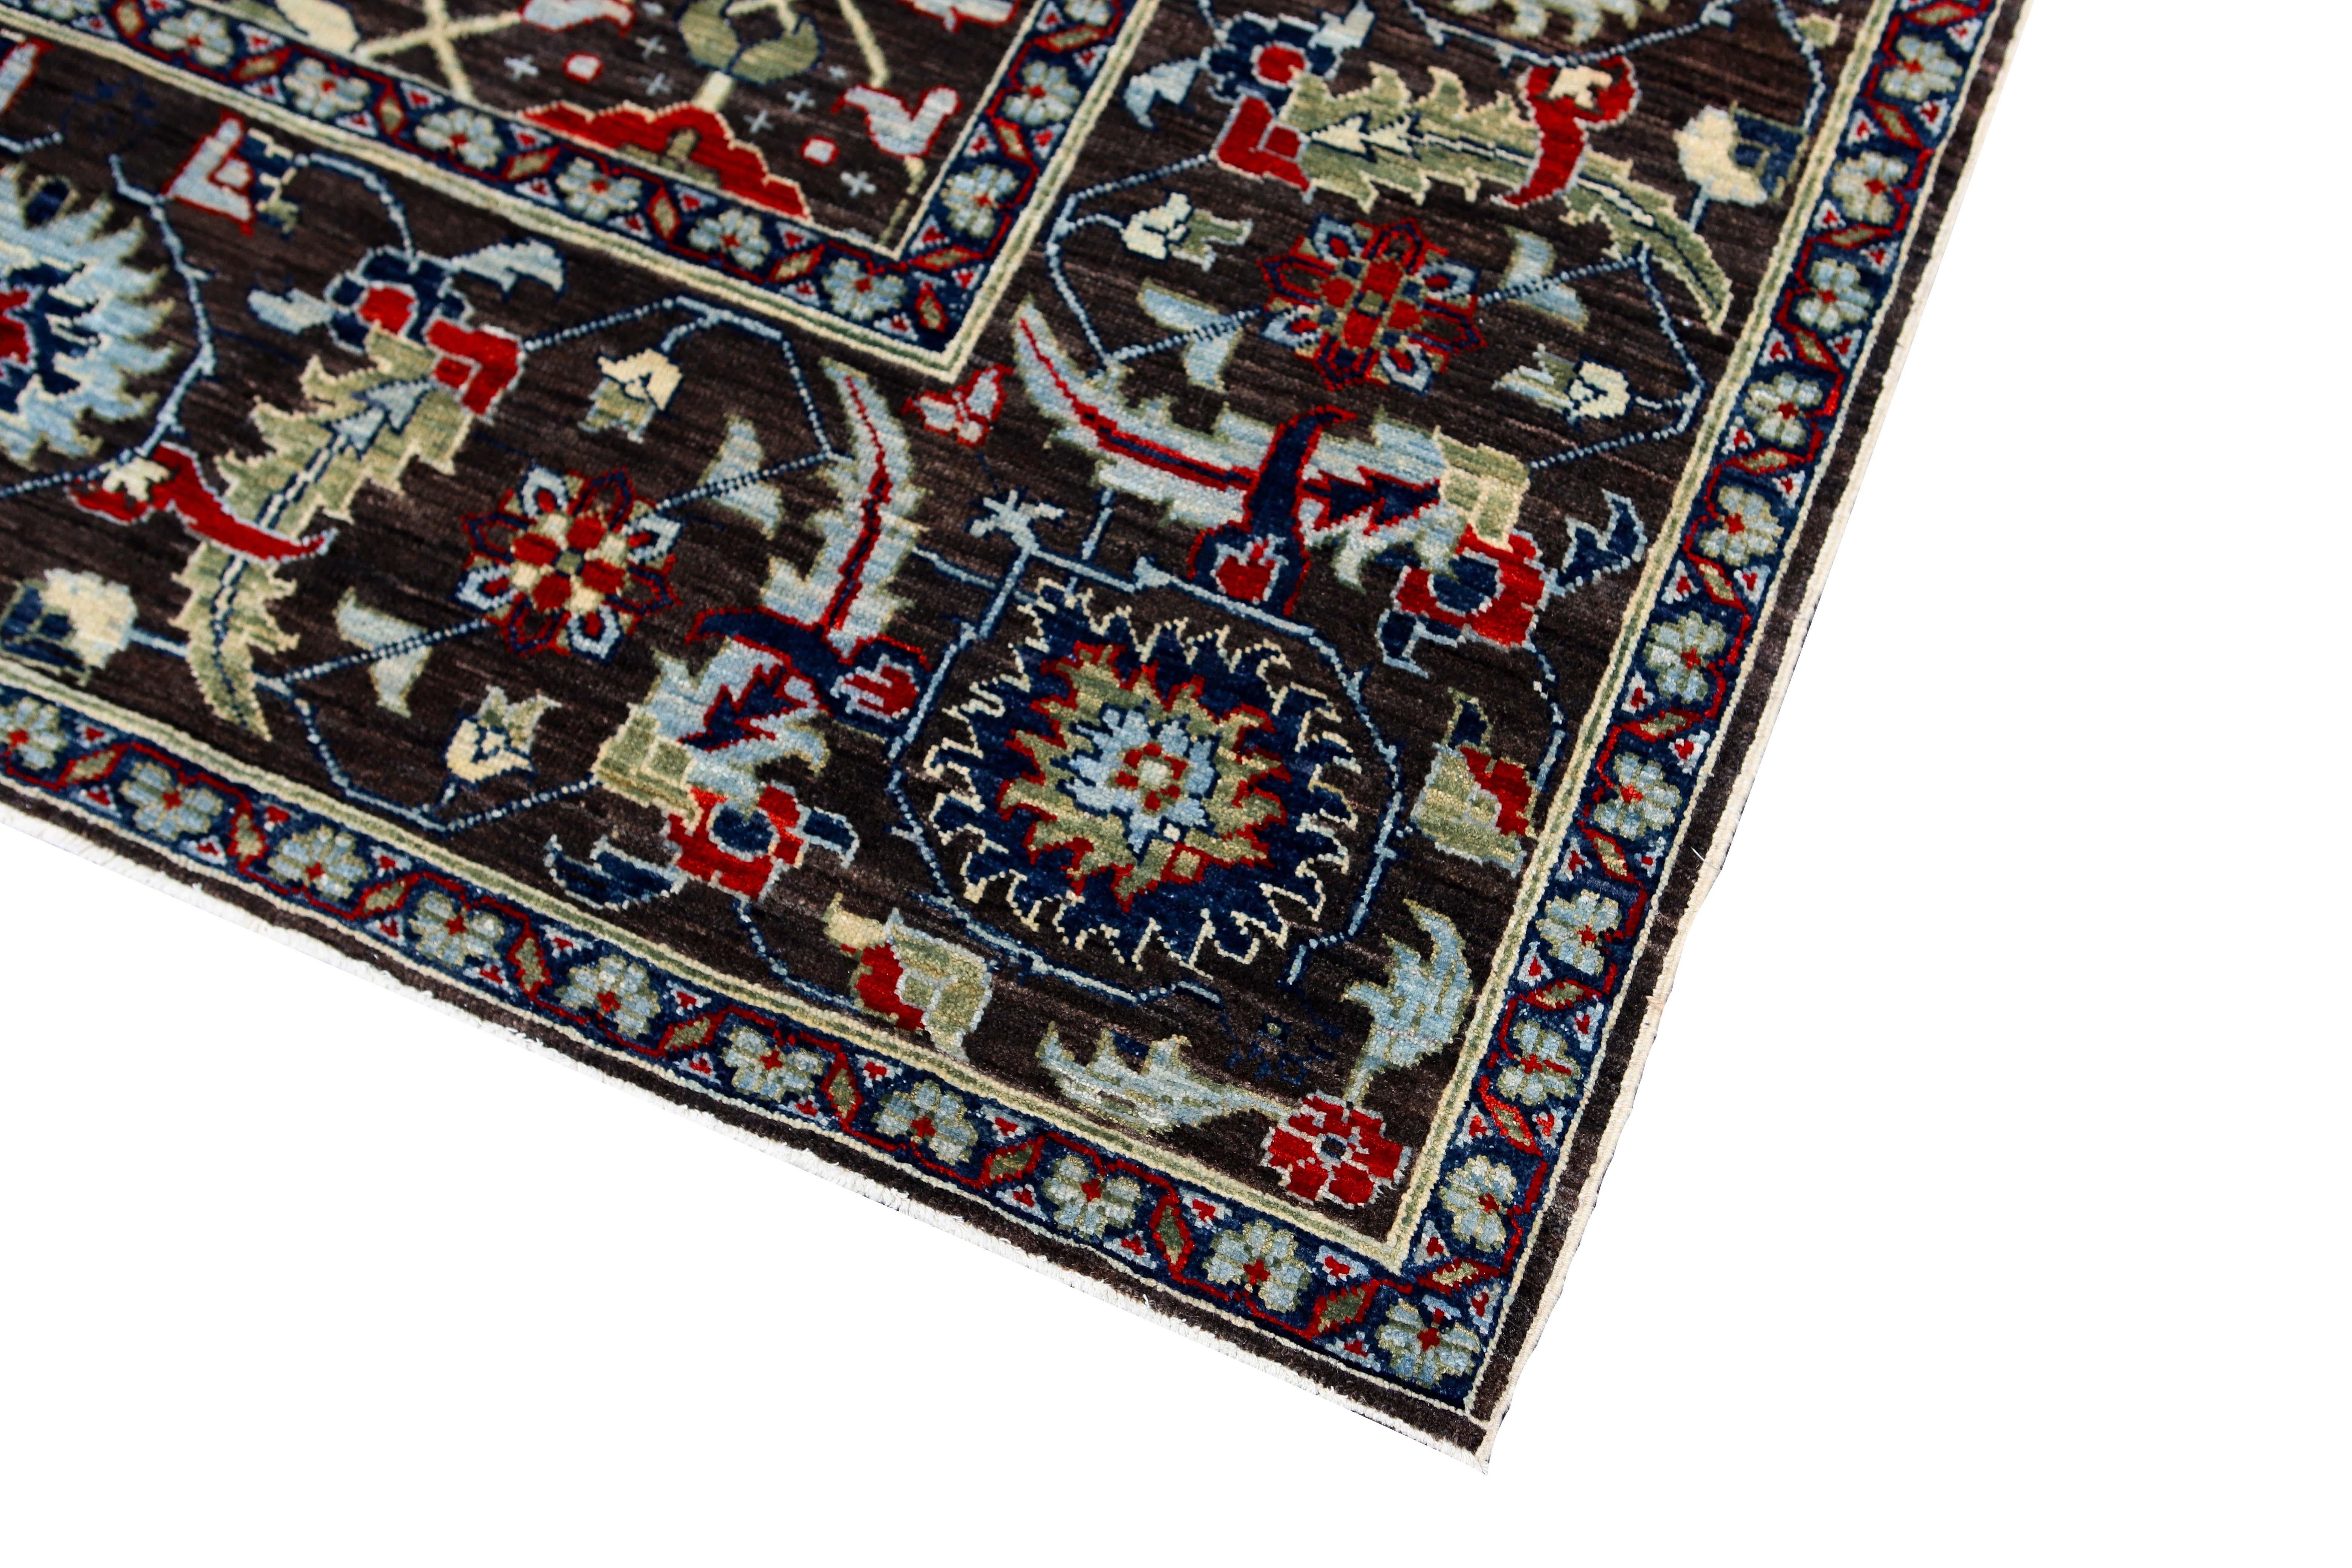 Black transitional Afghan designed 10 x 14 rug.
Hand knotted with hand-spun wool, woven in Afghanistan. This beautifully designed rug will be sure to stand out in any room. Measures: 10'2’ x 13